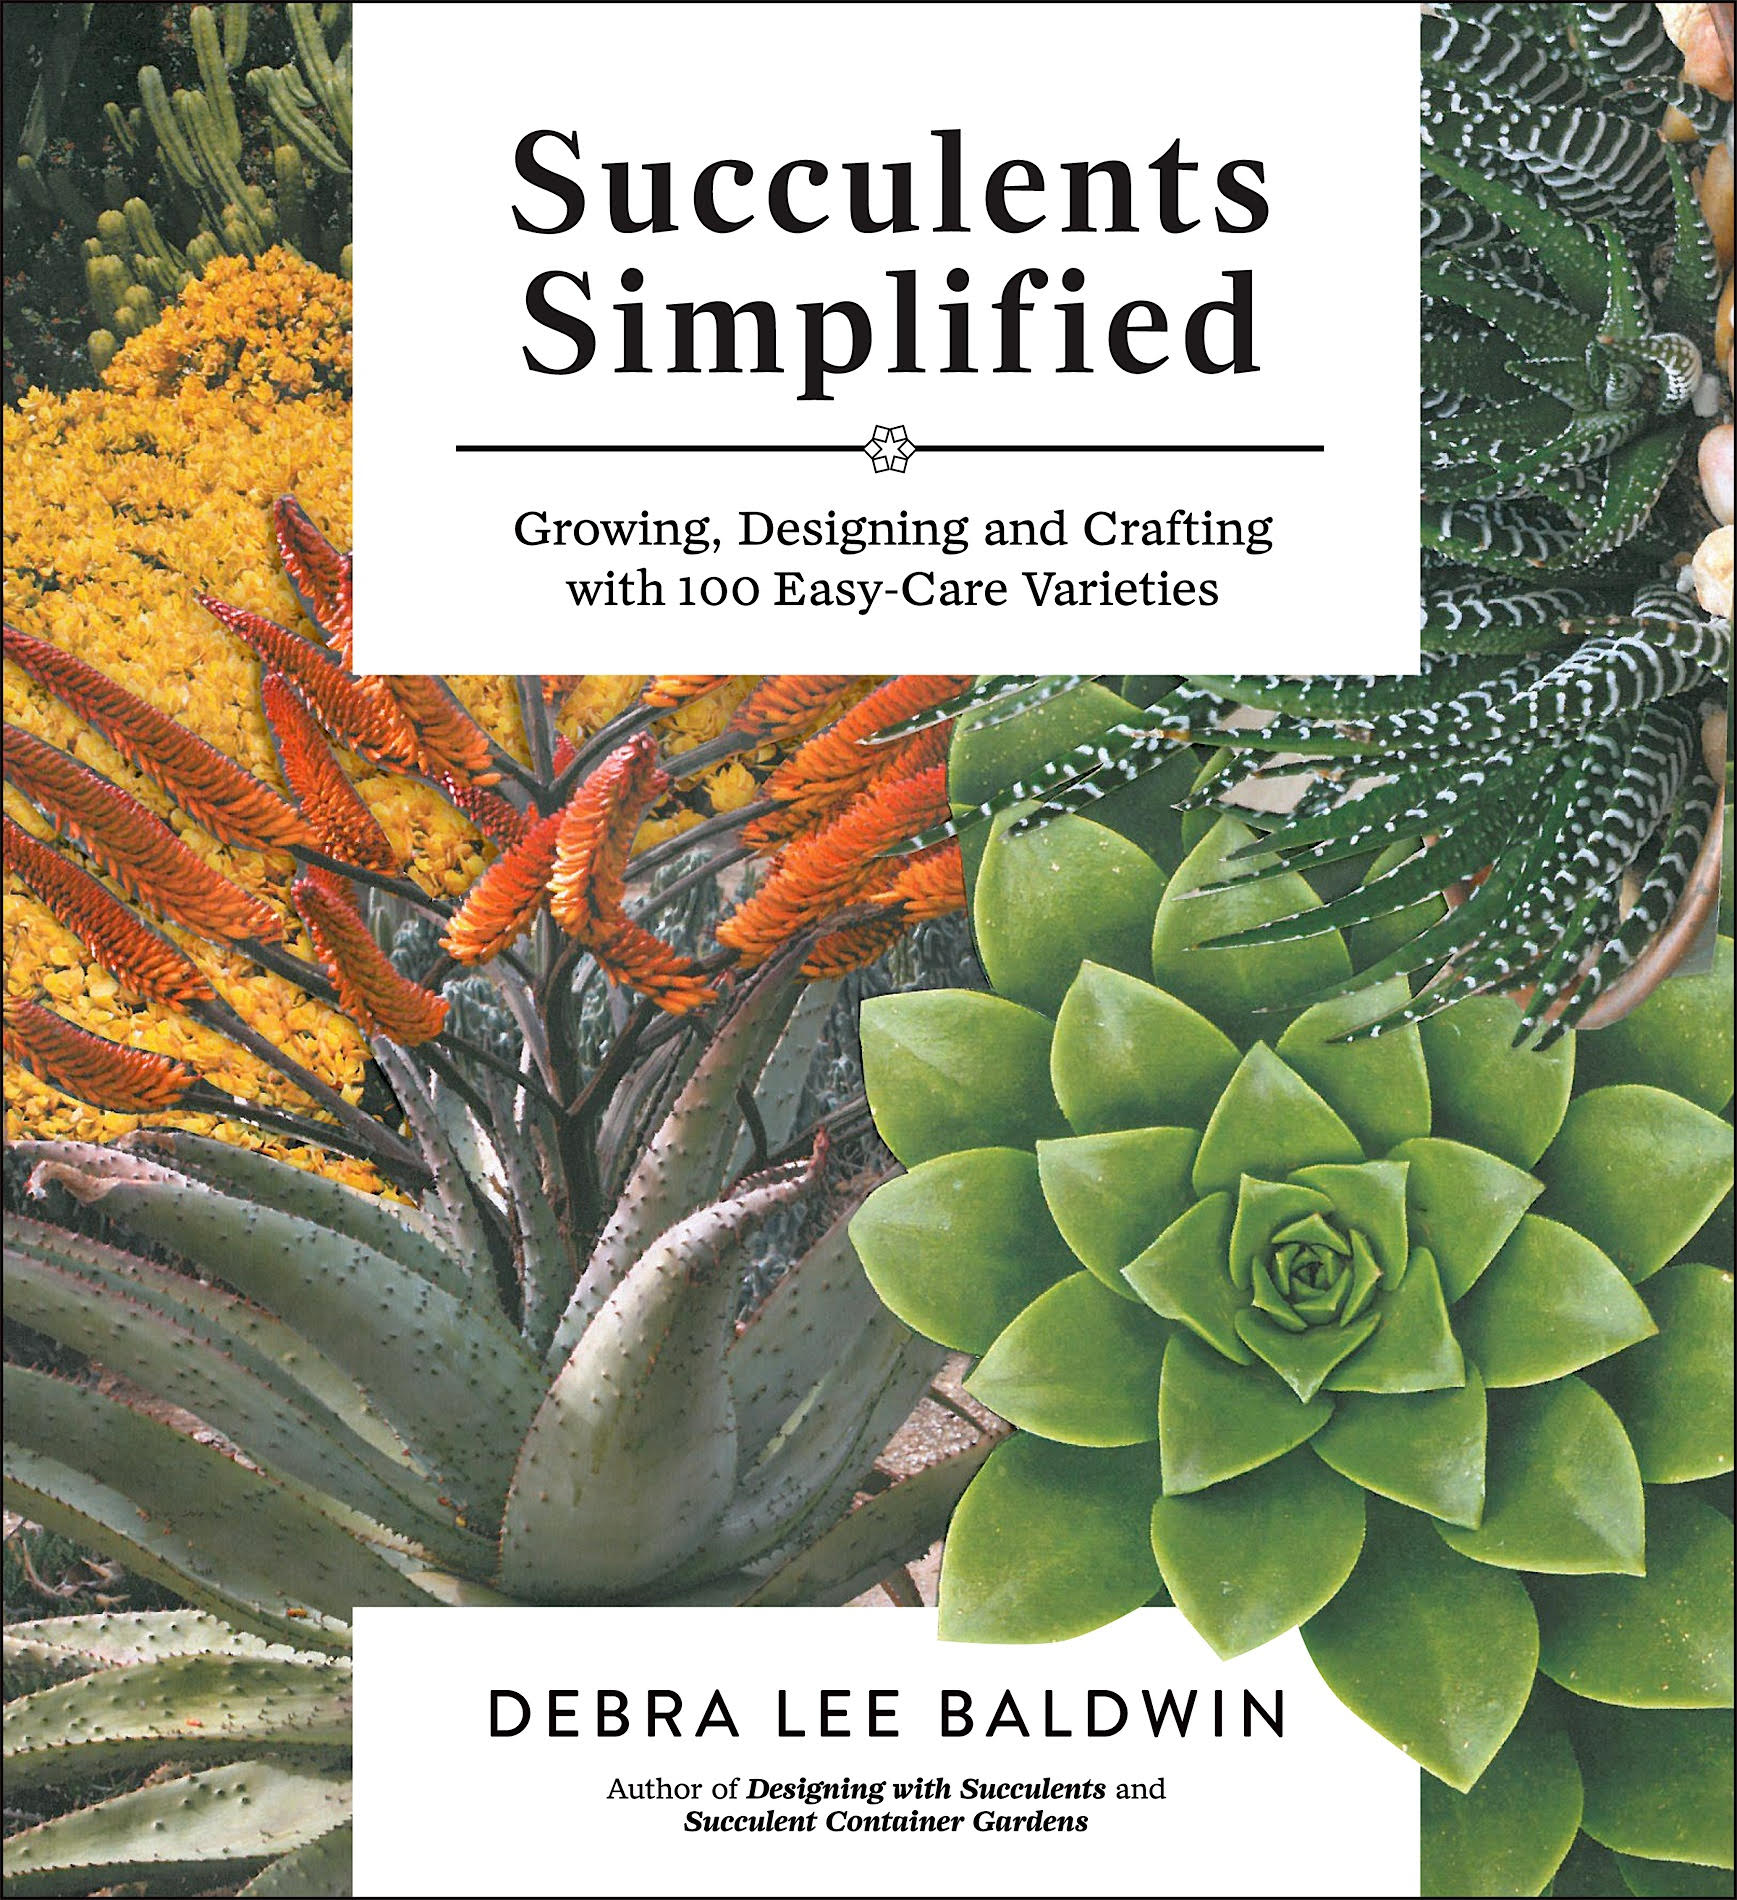 terrific gift for succulent lovers, book Succulents Simplified